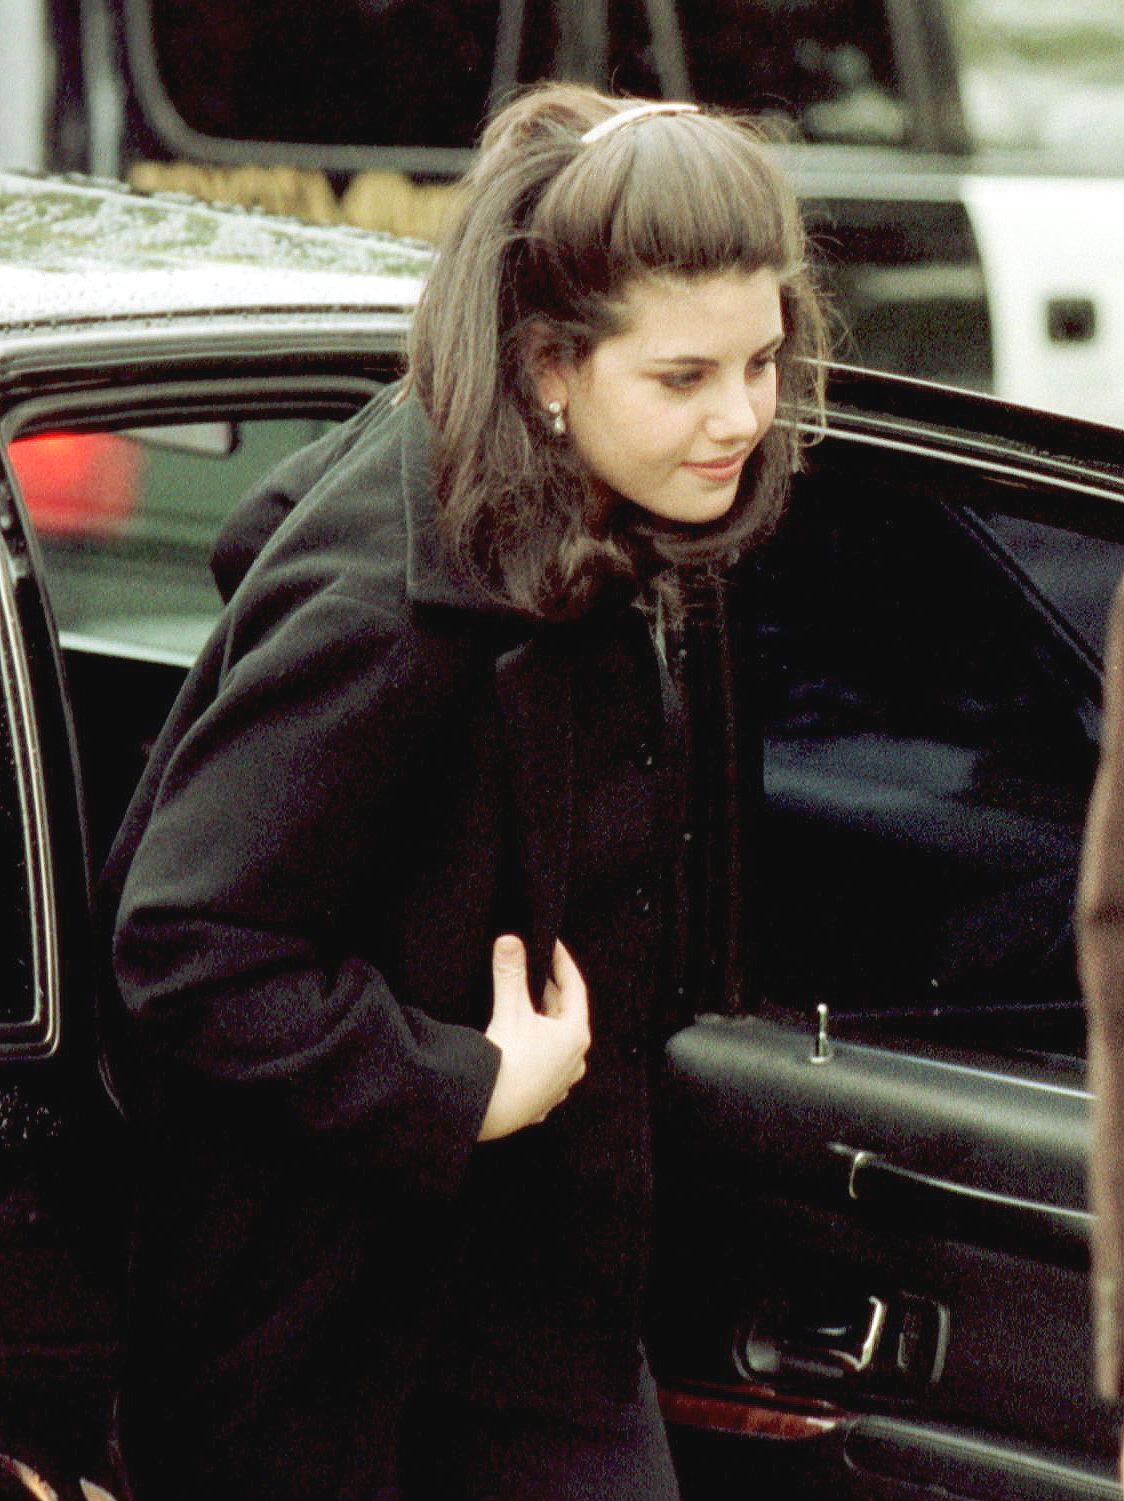 Monica Lewinsky arrives at her father's home on February 3, 1998 in Brentwood, California. | Source: Getty Images